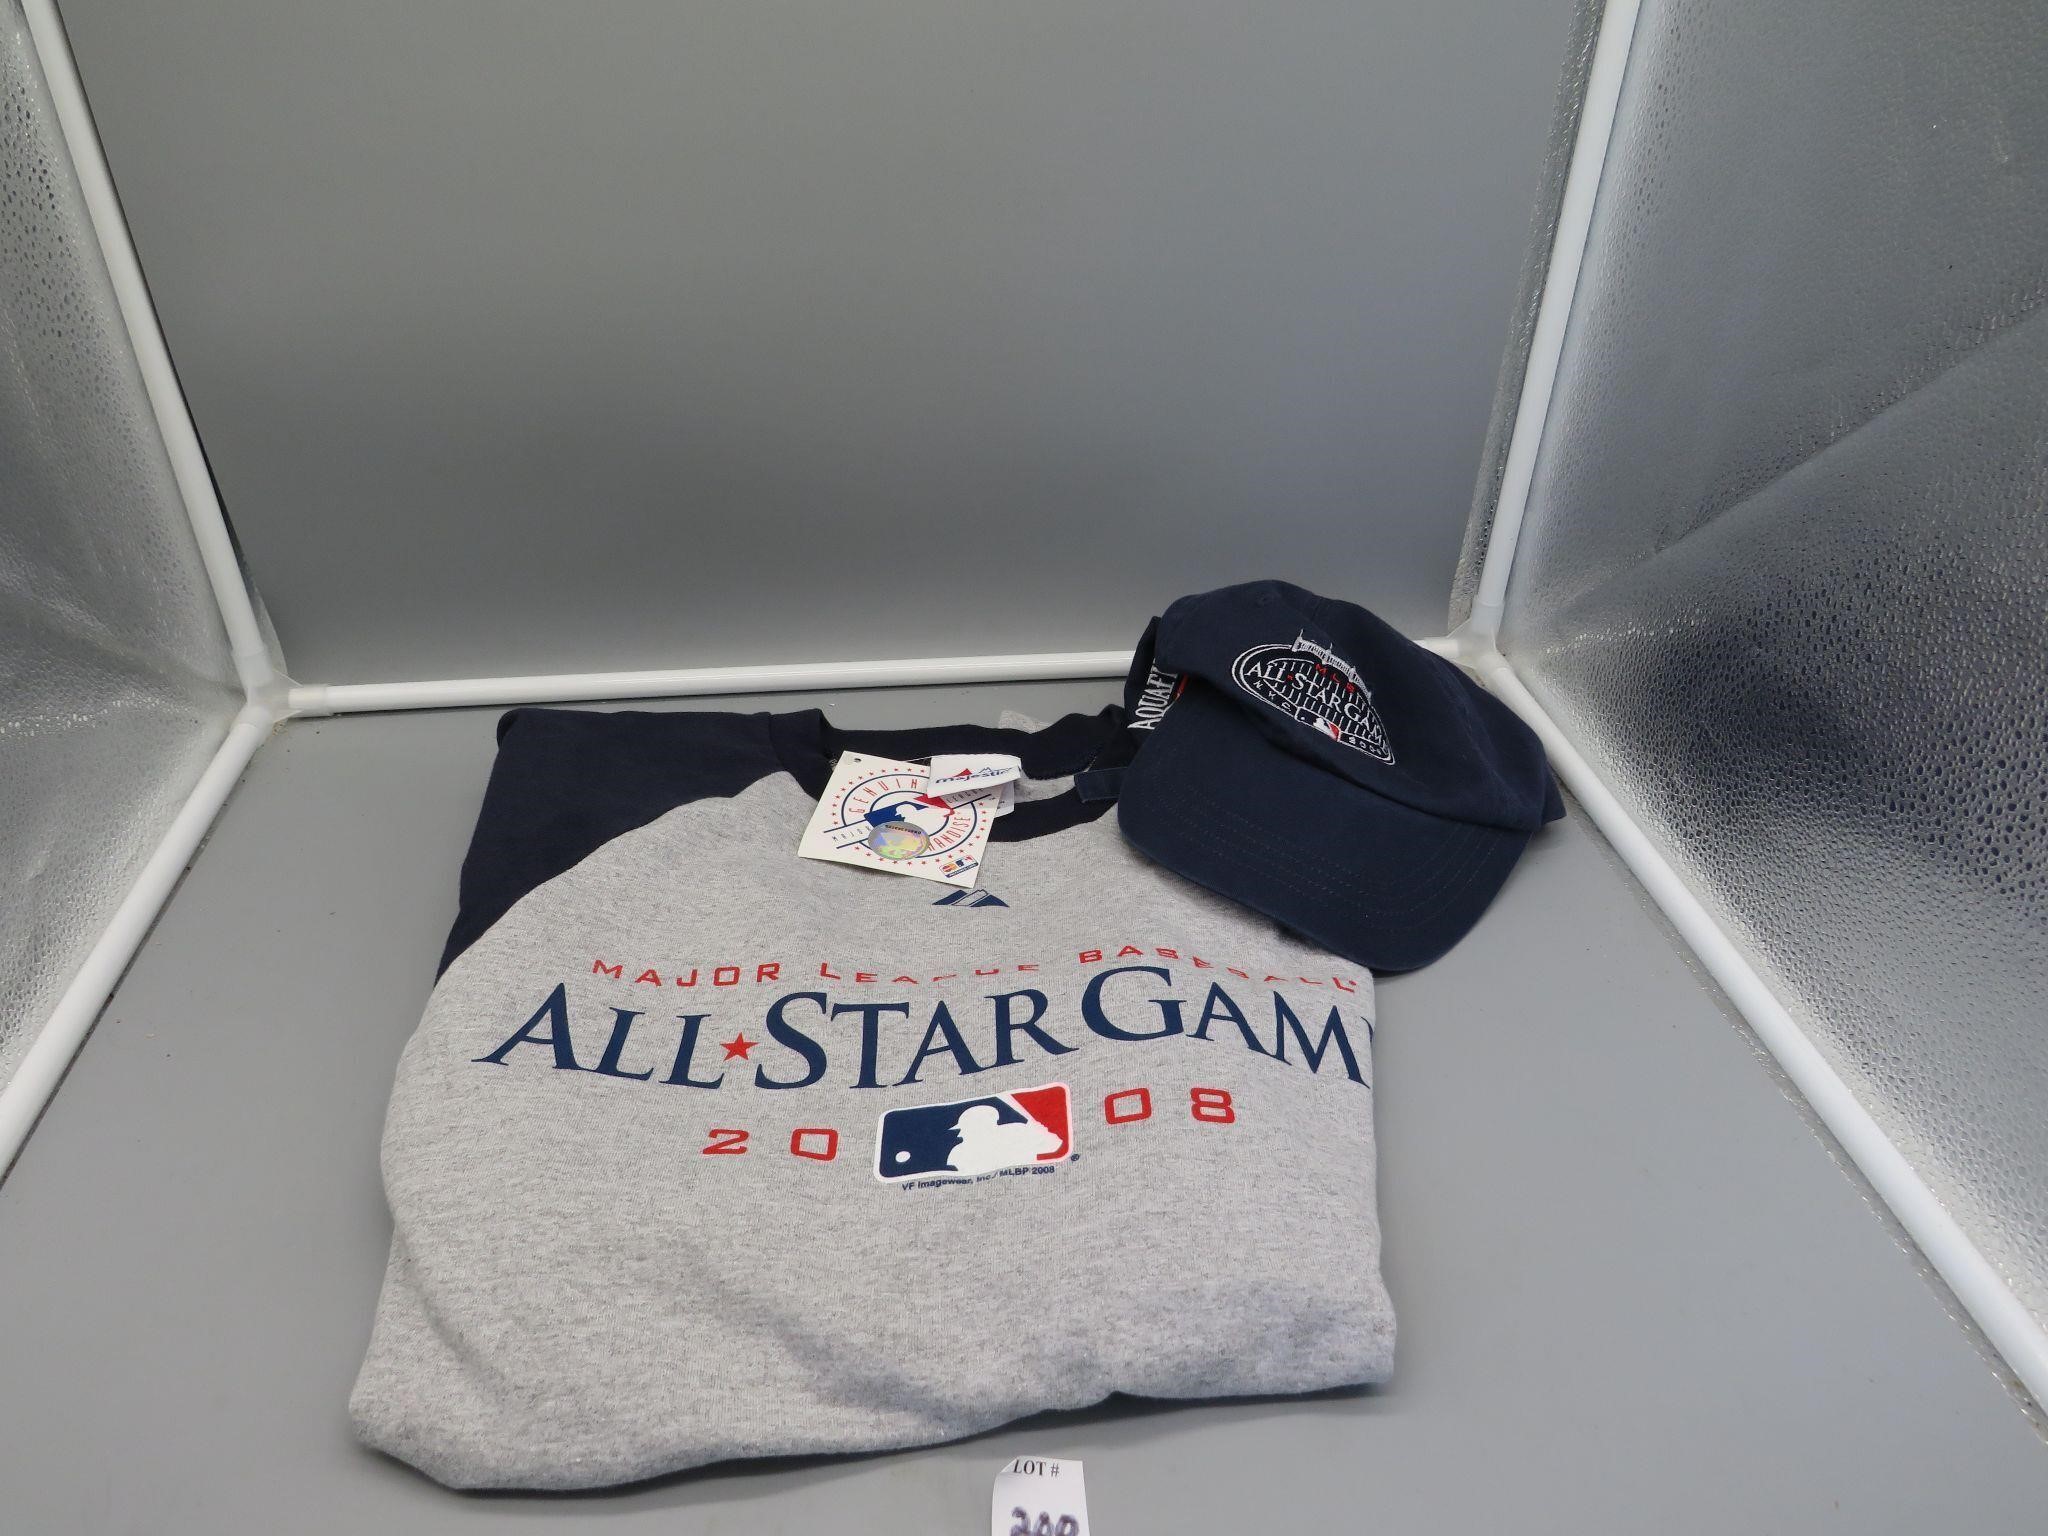 2008 MLB All Star Game Large 3 Quarter T-shirt and